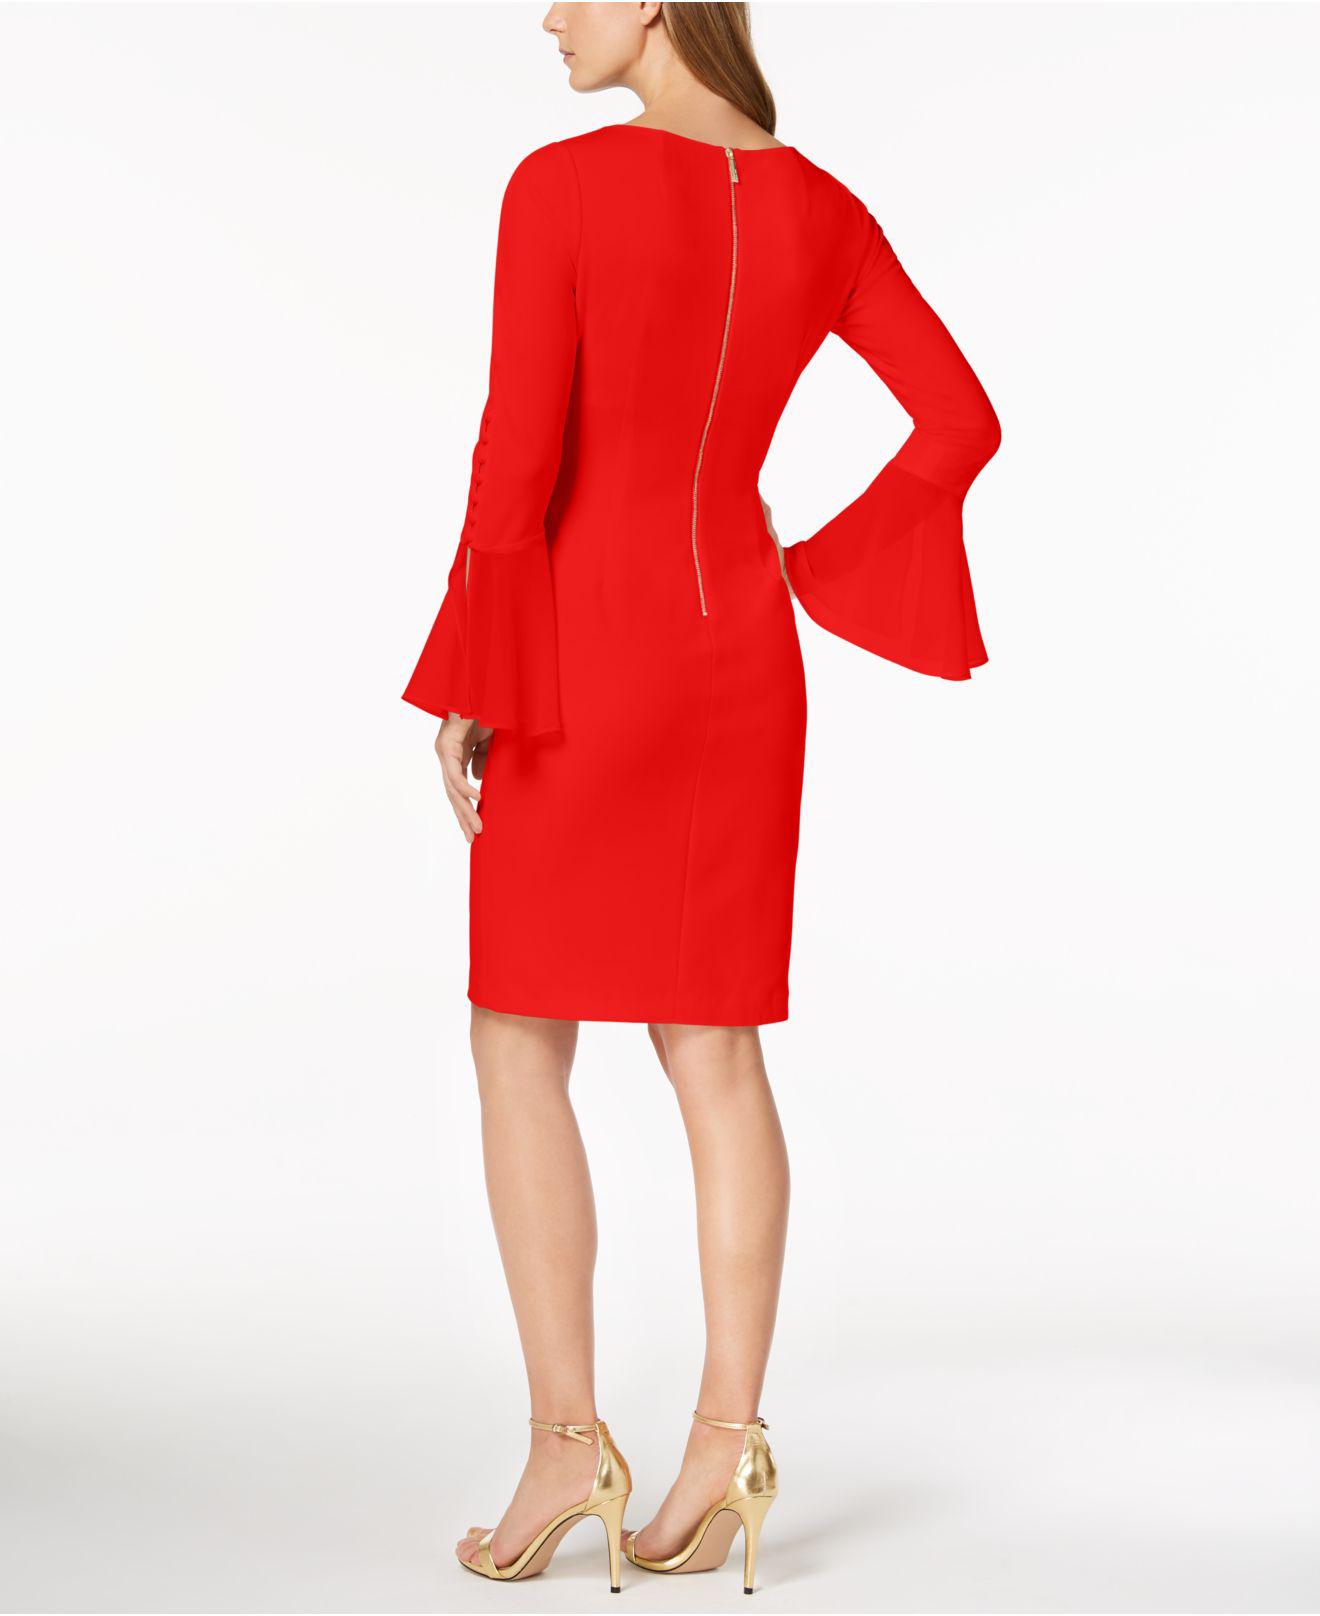 Calvin Klein Red Dress With Bell Sleeves U.K., SAVE 43% - aveclumiere.com